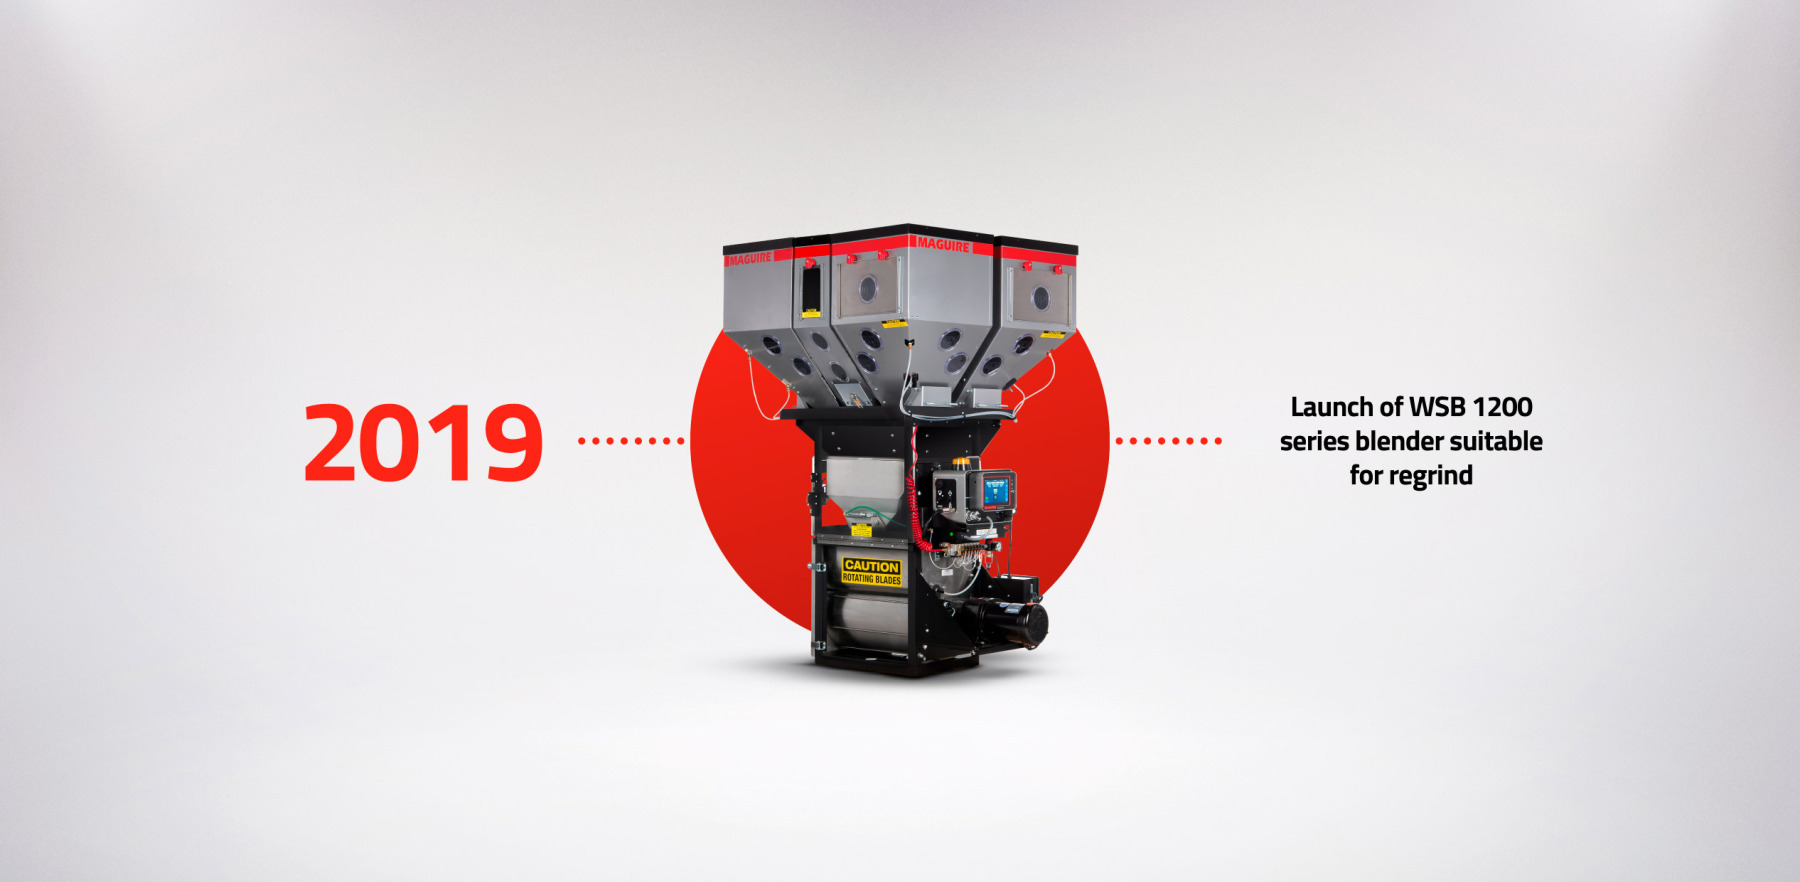 Launch of WSB 1200 series blender suitable for regrind